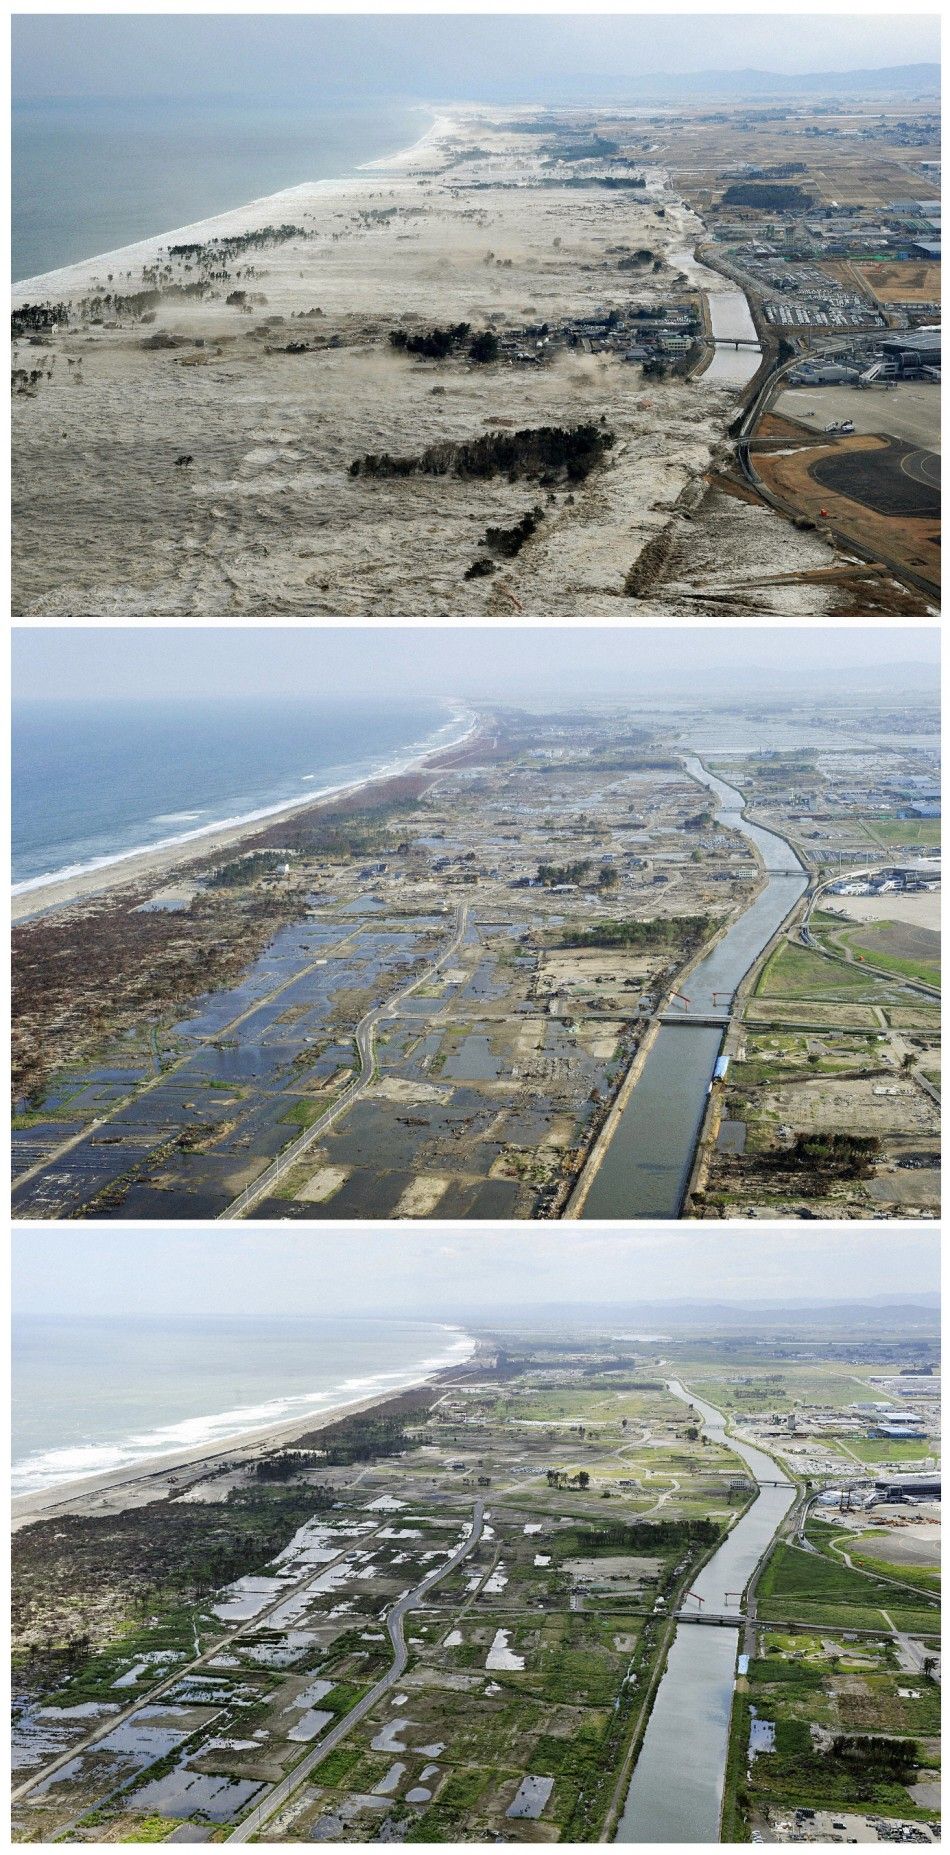 March 11 Tsunami Aftermath, Then and Now